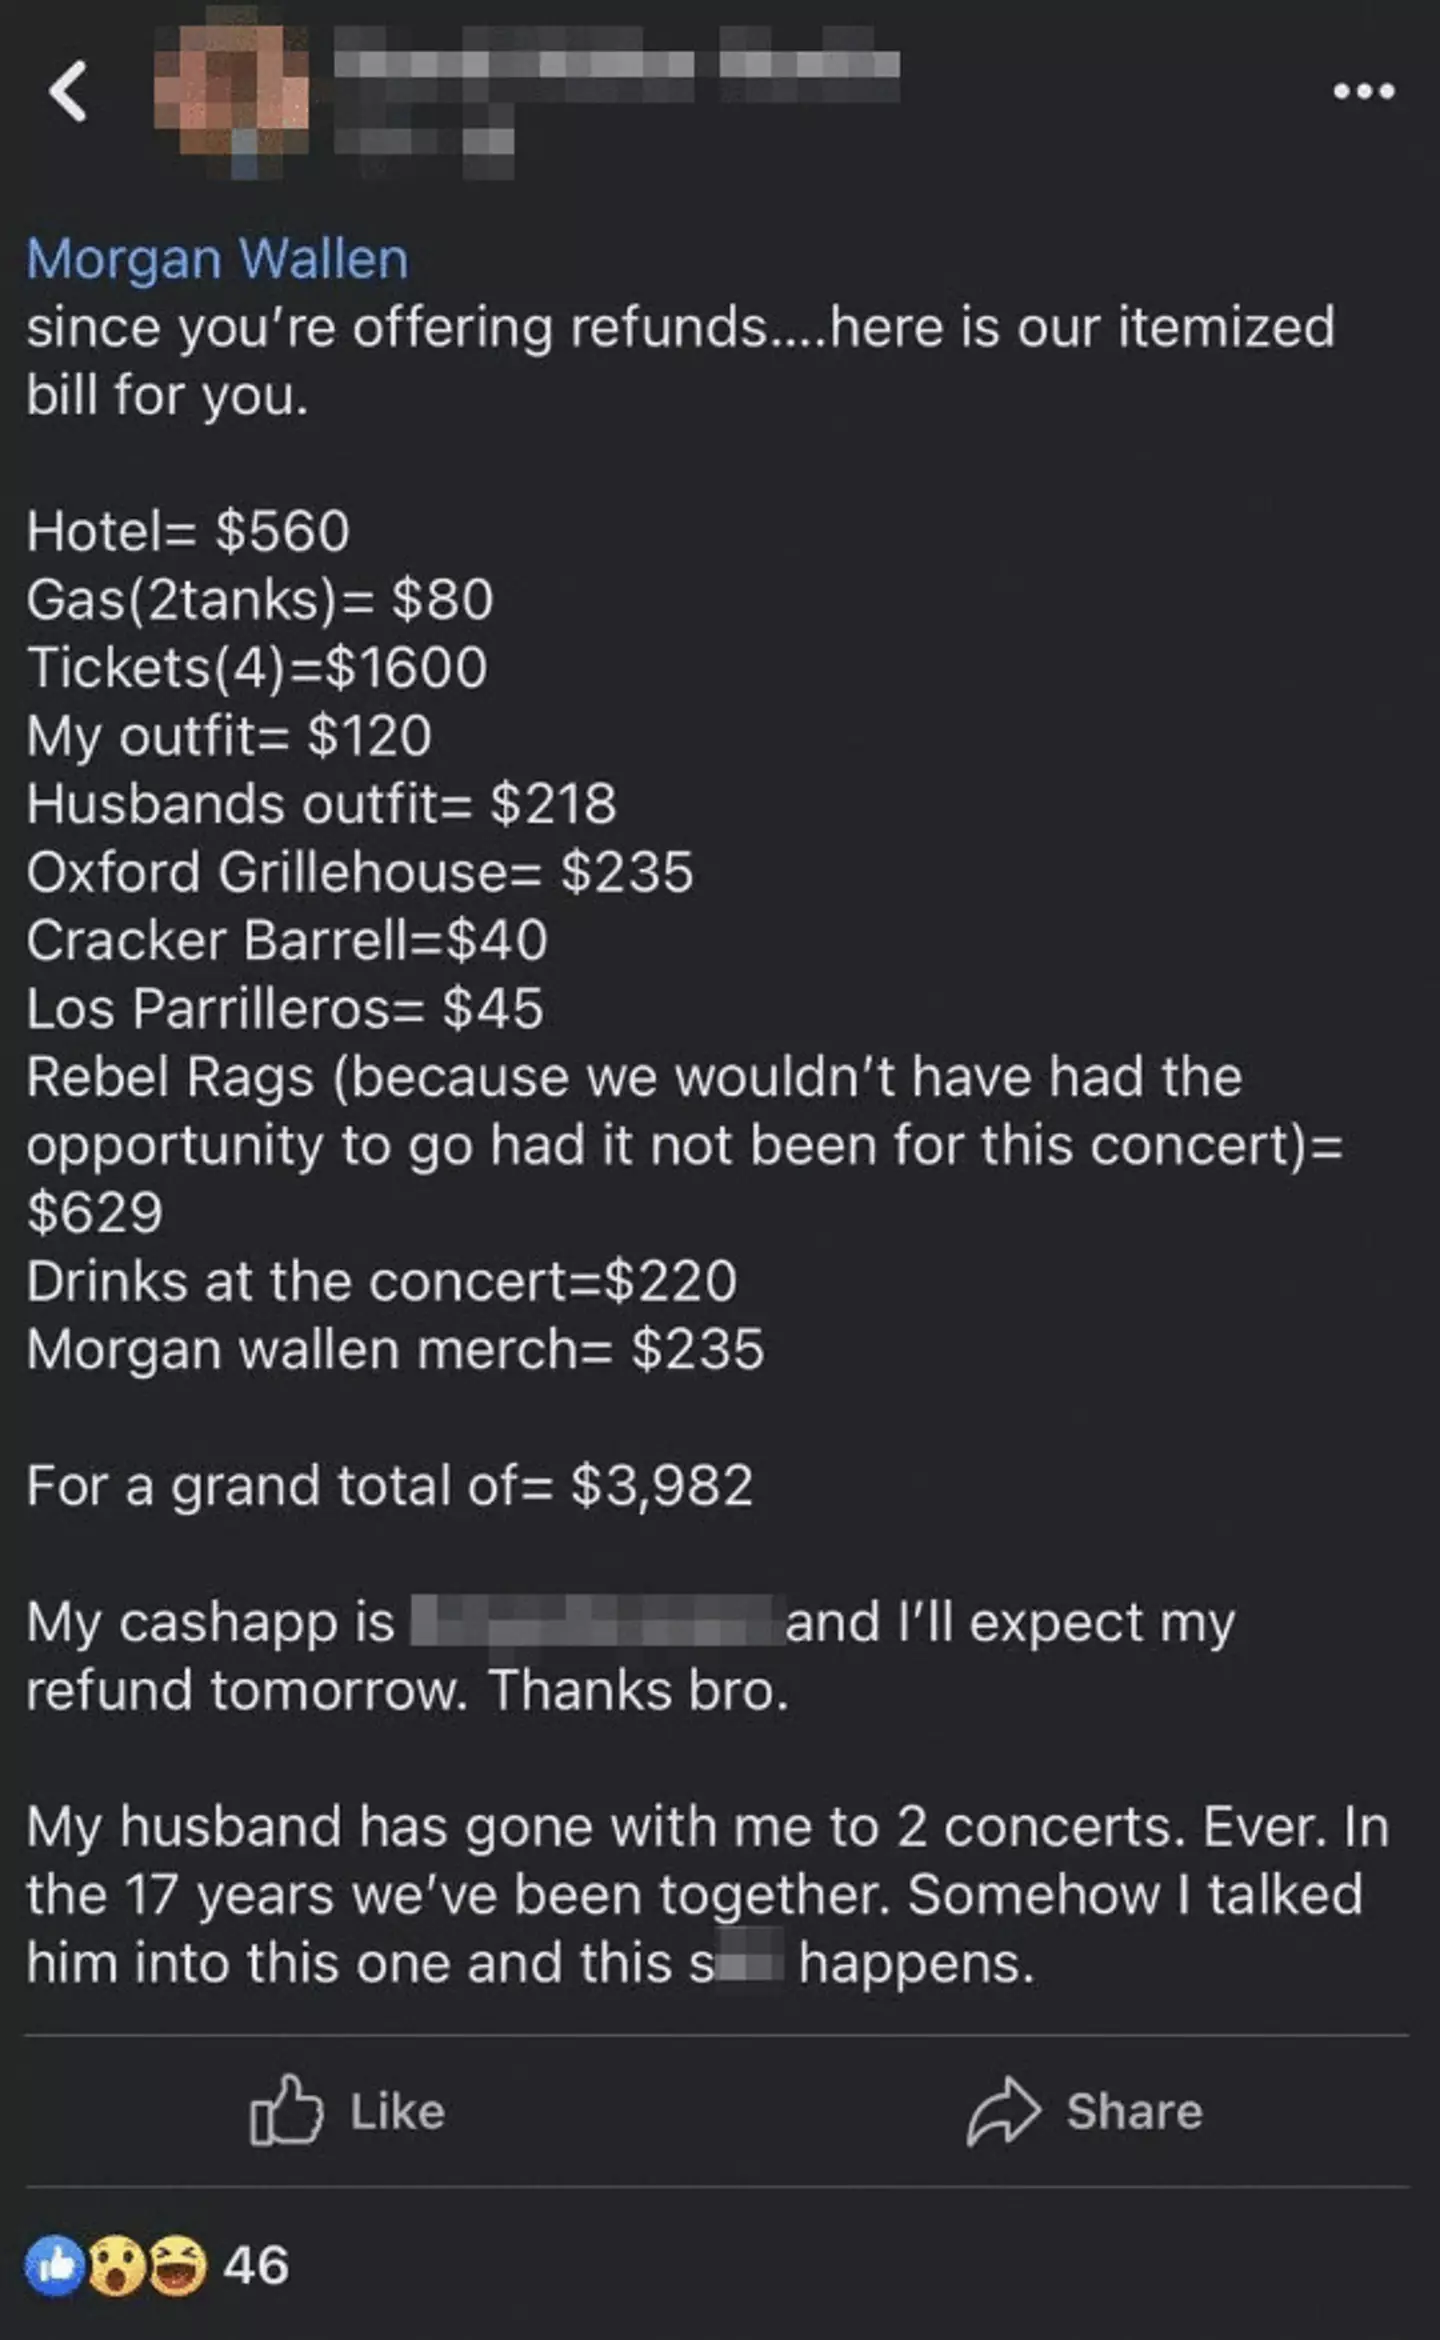 The concertgoer claimed they spent thousands.